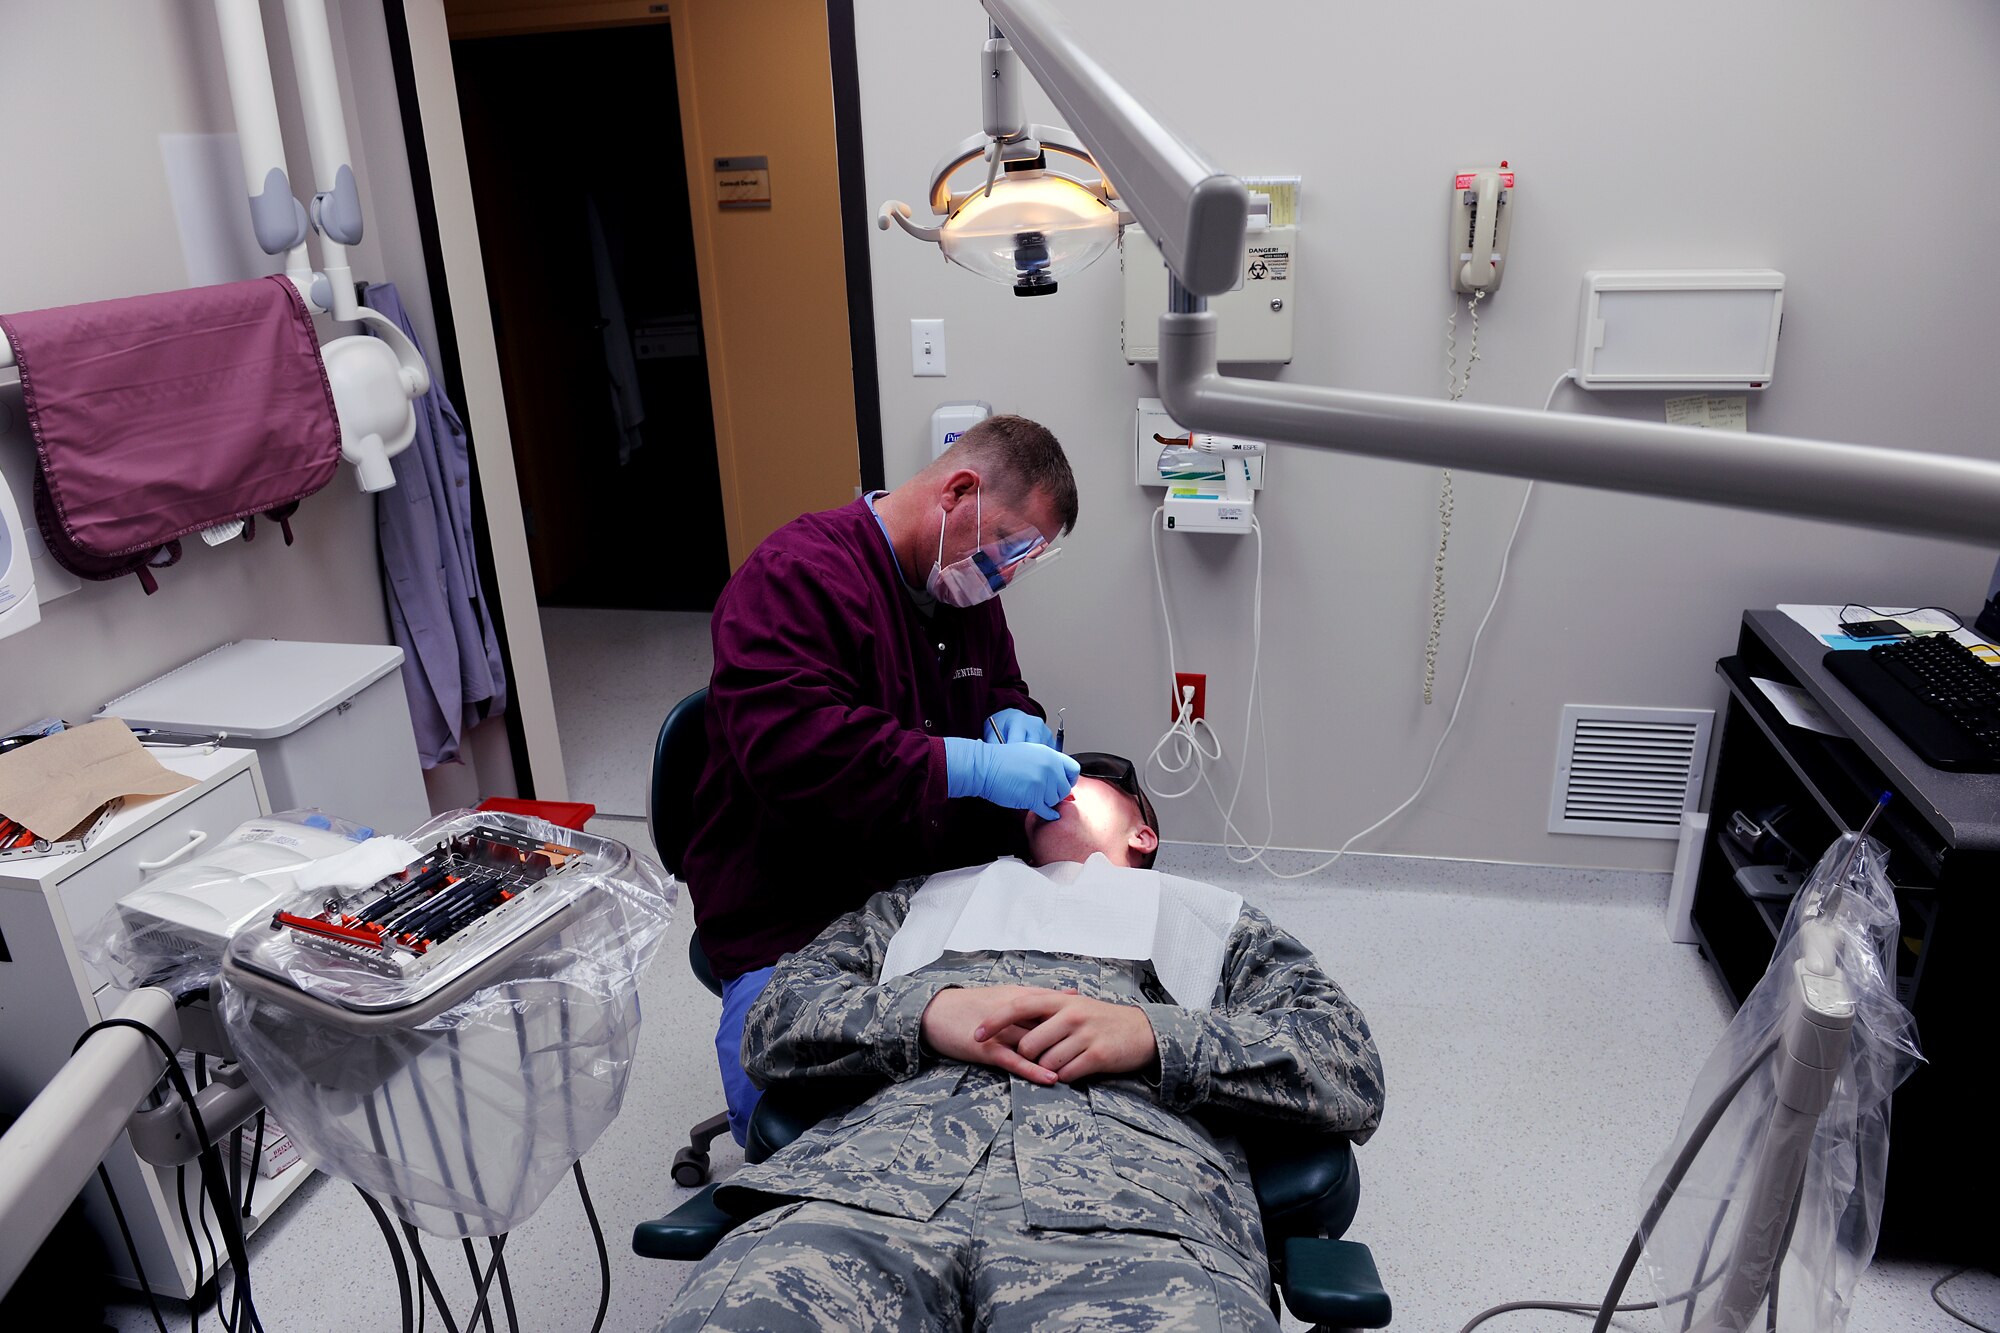 MOODY AIR FORCE BASE, Ga. -- Staff Sgt. Steven Smith, 23rd Aeromedical Dental Squadron dental technician, cleans the teeth of Airman 1st Class Edward Huffman, 822nd Security Forces Squadron member, during a routine dental cleaning here May 12. Airmen are required to have a routine dental cleaning and check-up annually. (U.S. Air Force photo by Airman 1st Class Joshua Green/RELEASED)